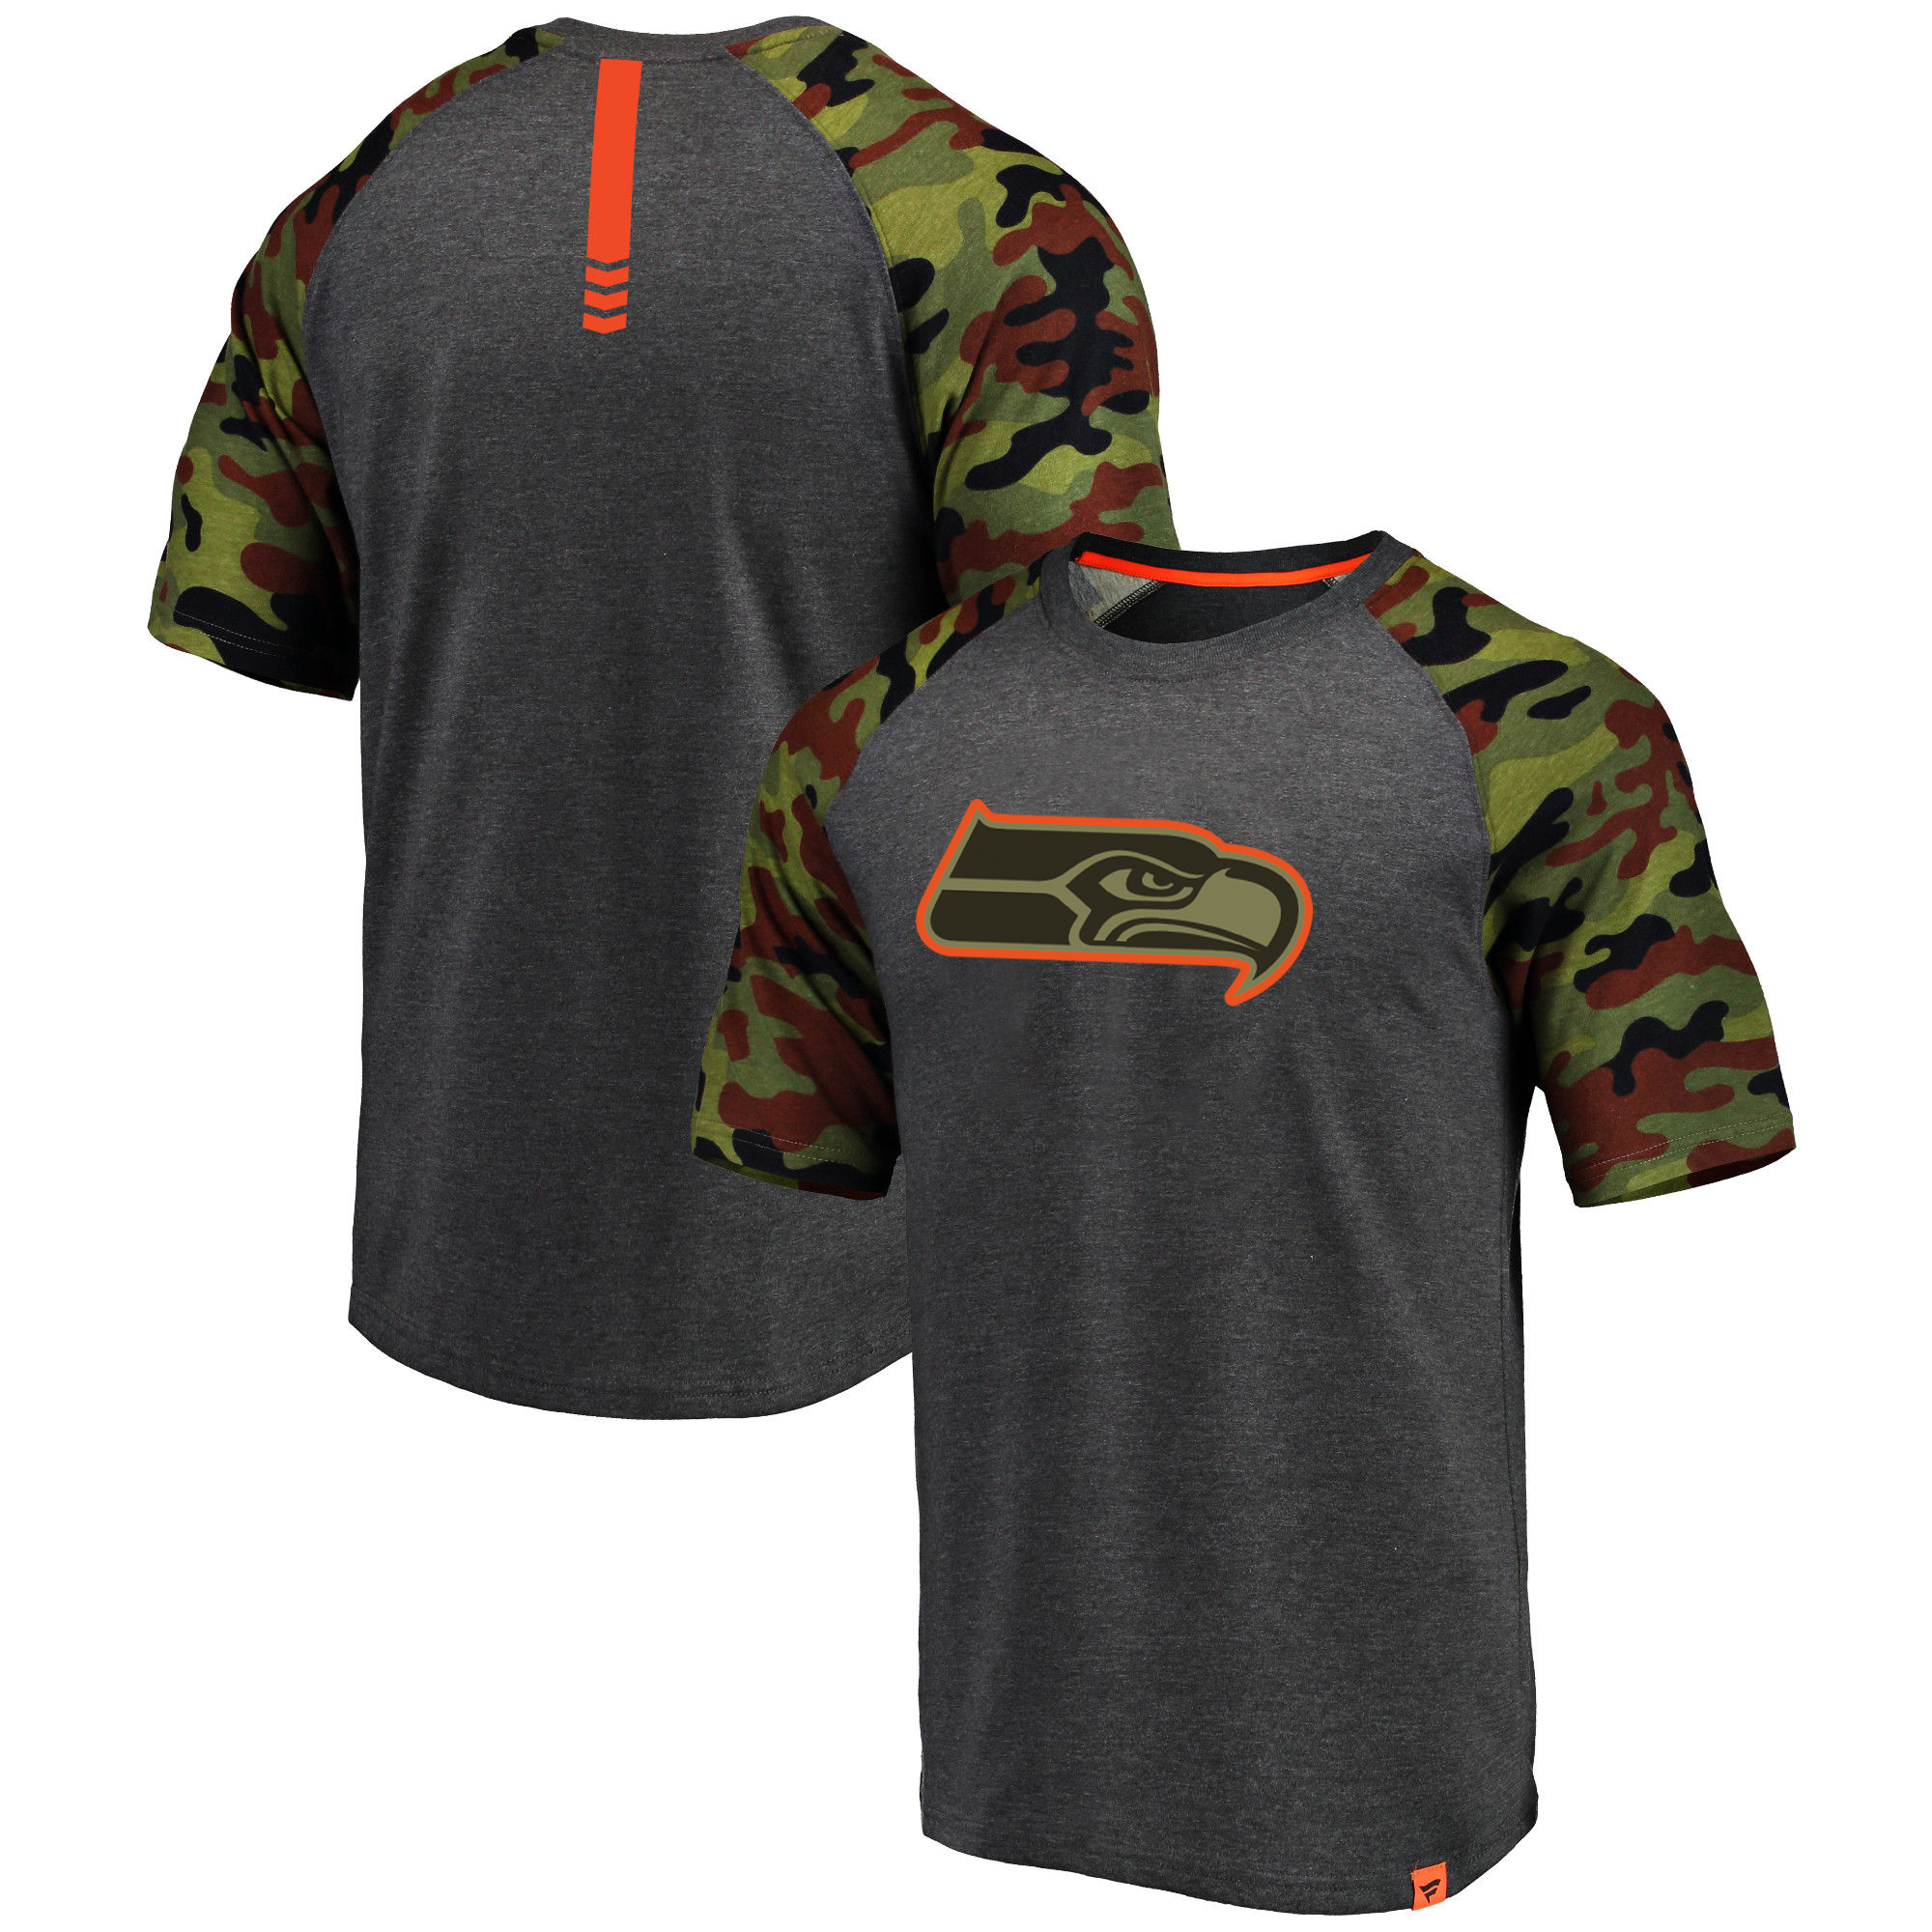 Seattle Seahawks Heathered Gray Camo NFL Pro Line by Fanatics Branded T-Shirt - Click Image to Close